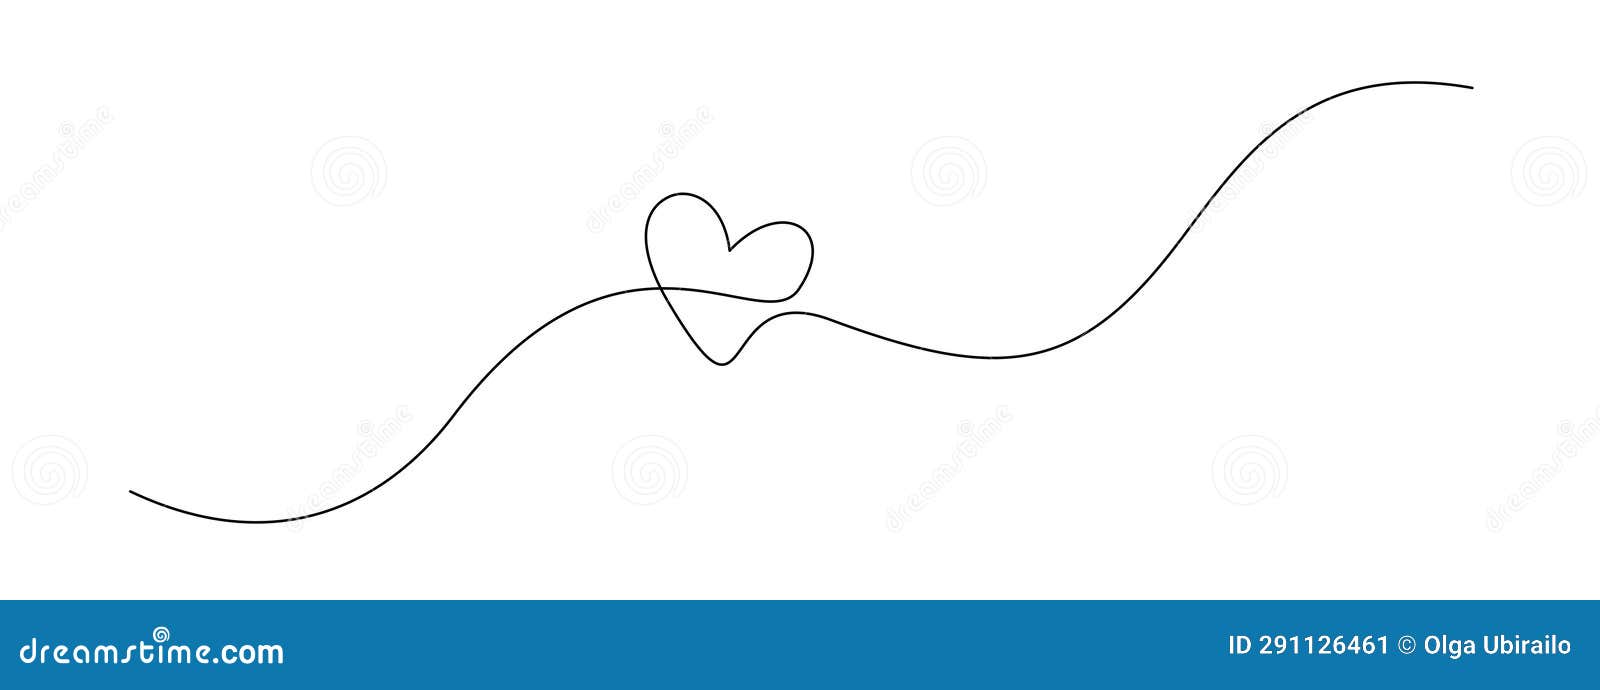 One Continuous Drawing of Heart Shape Love Sign. Oitline and Romantic ...